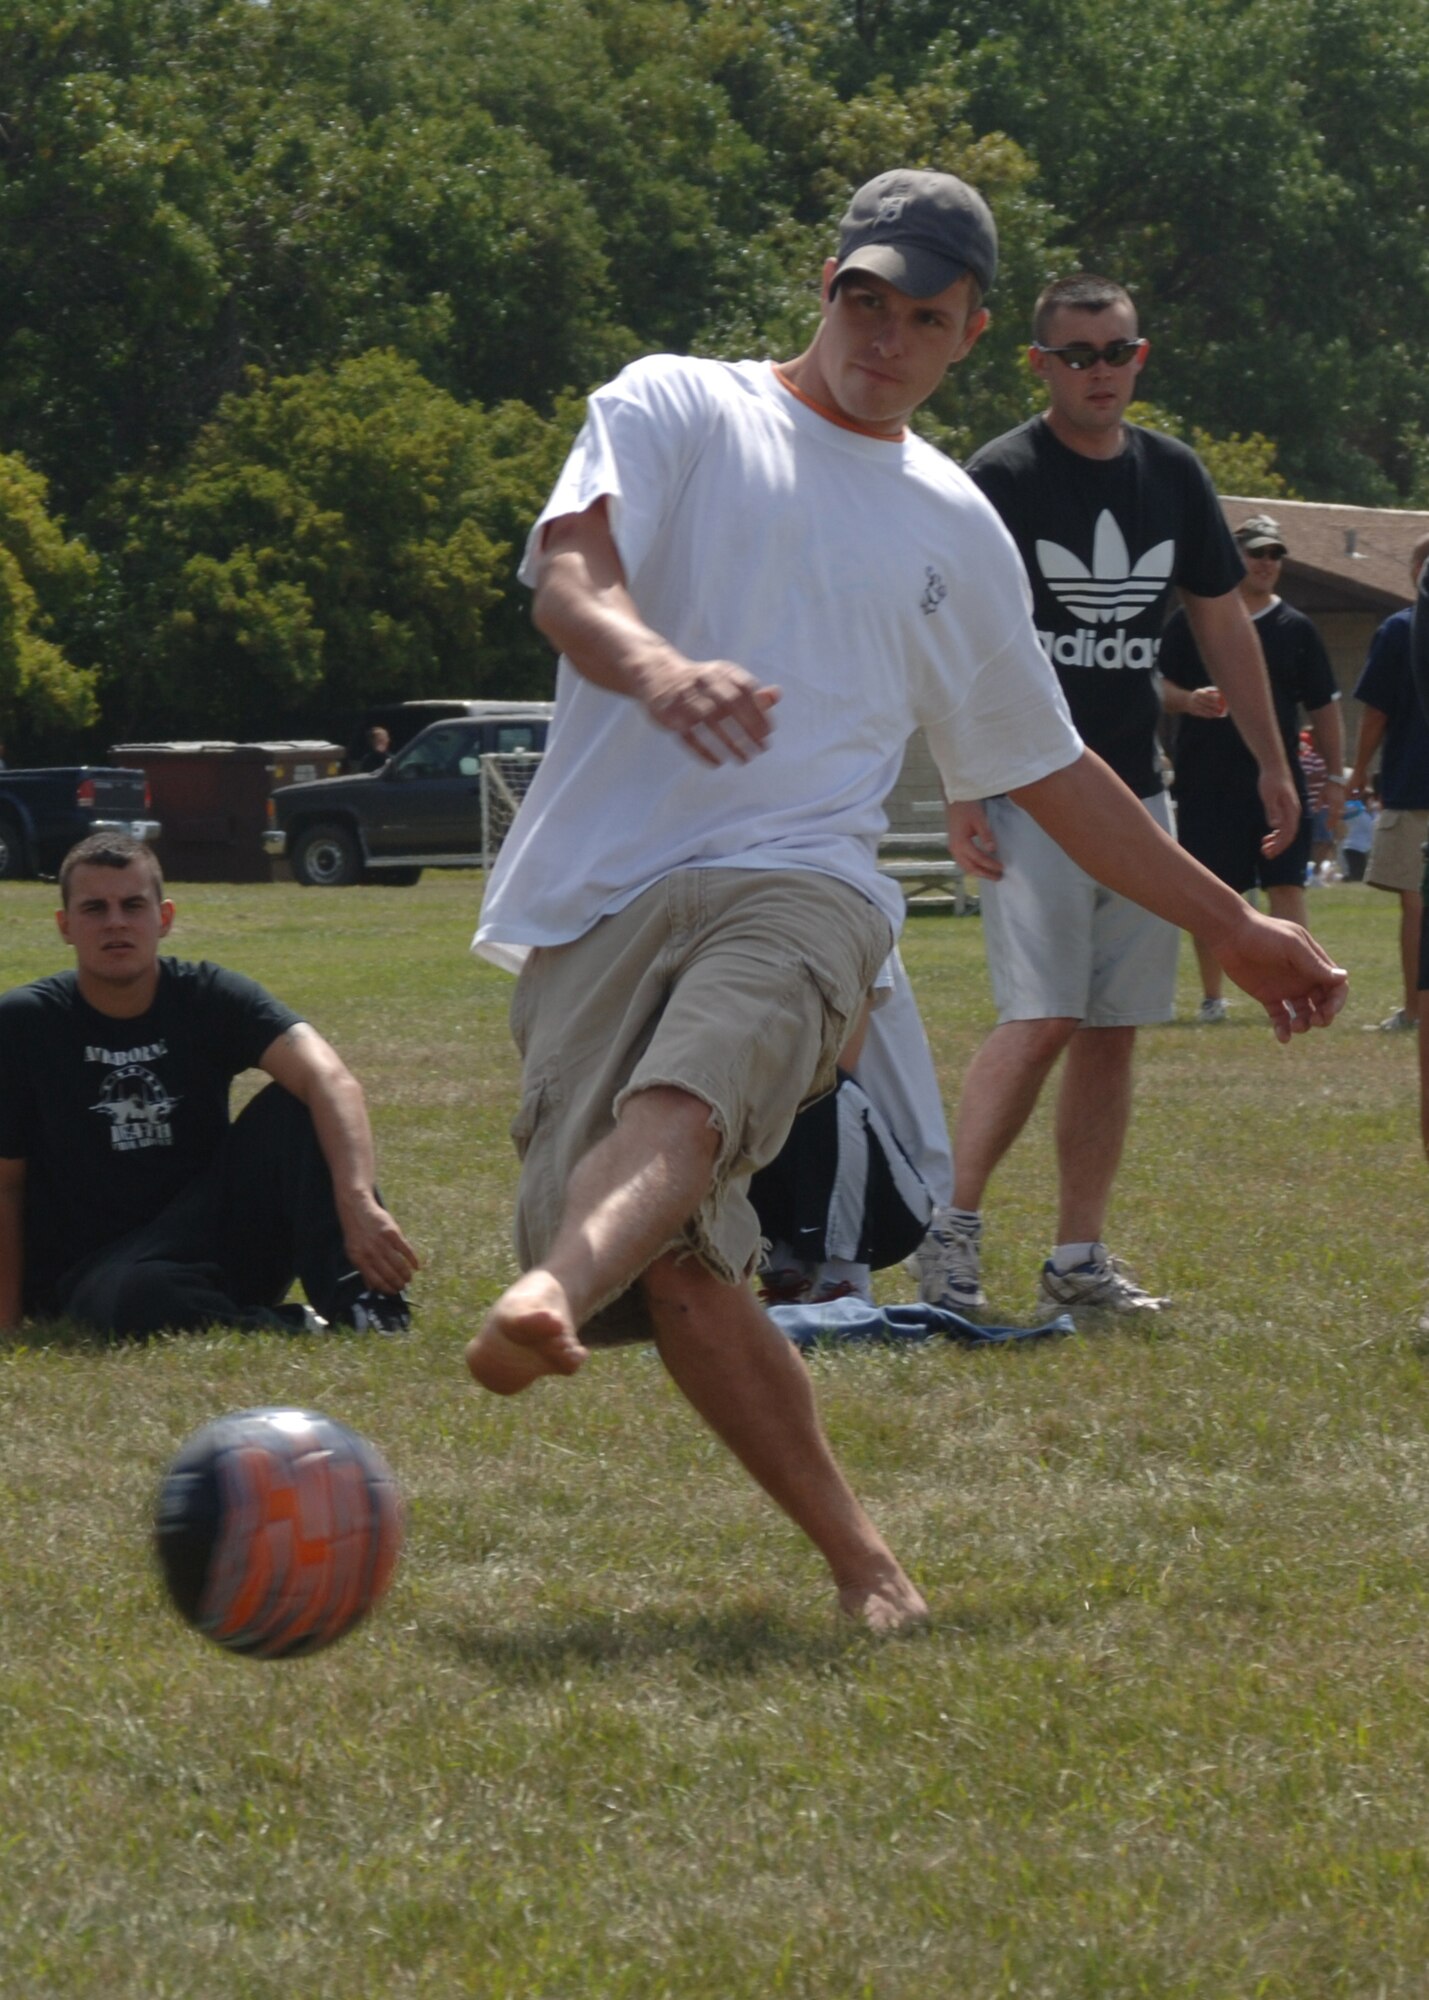 Airman 1st Class Paul Adams, 319th Operation Support Squadron, kicks a worm burner while competing in the soccer kick contest during the 2007 Summer Bash. (USAF Photo/Staff Sgt Suellyn Nuckolls)